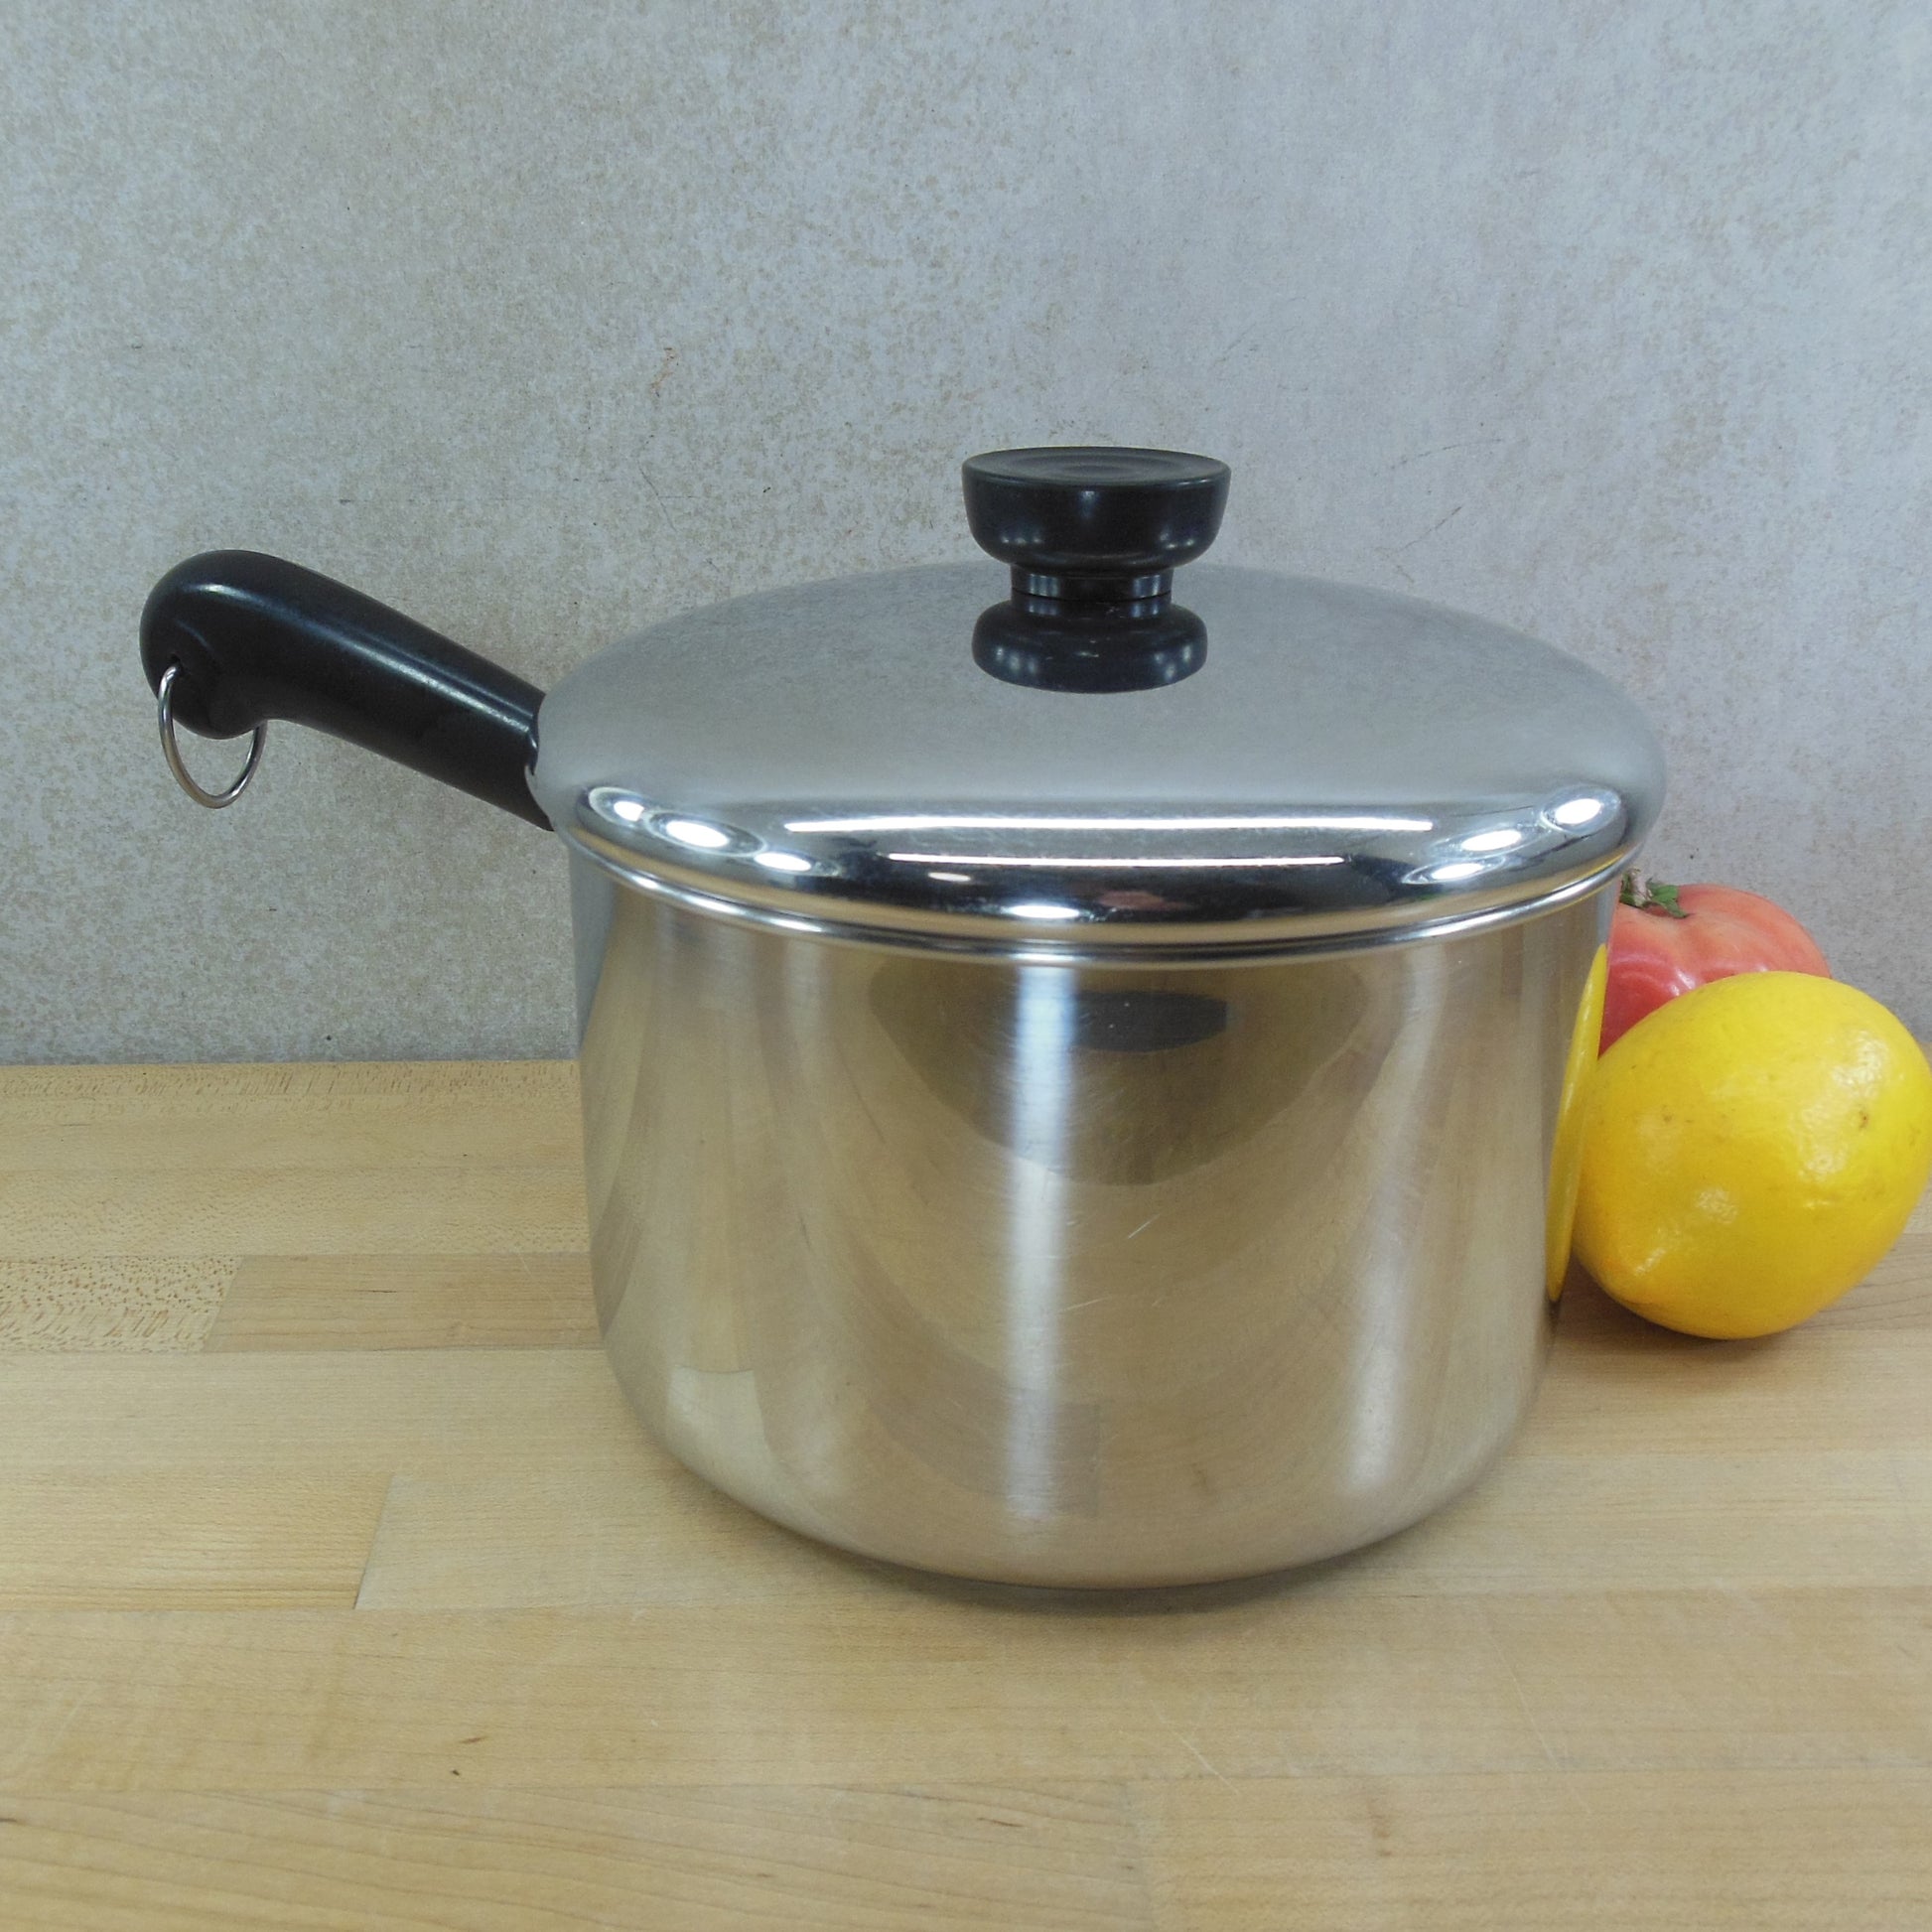 Vintage Revere Ware 1 Quart Saucepan Stainless Steel Copper Bottom with Lid